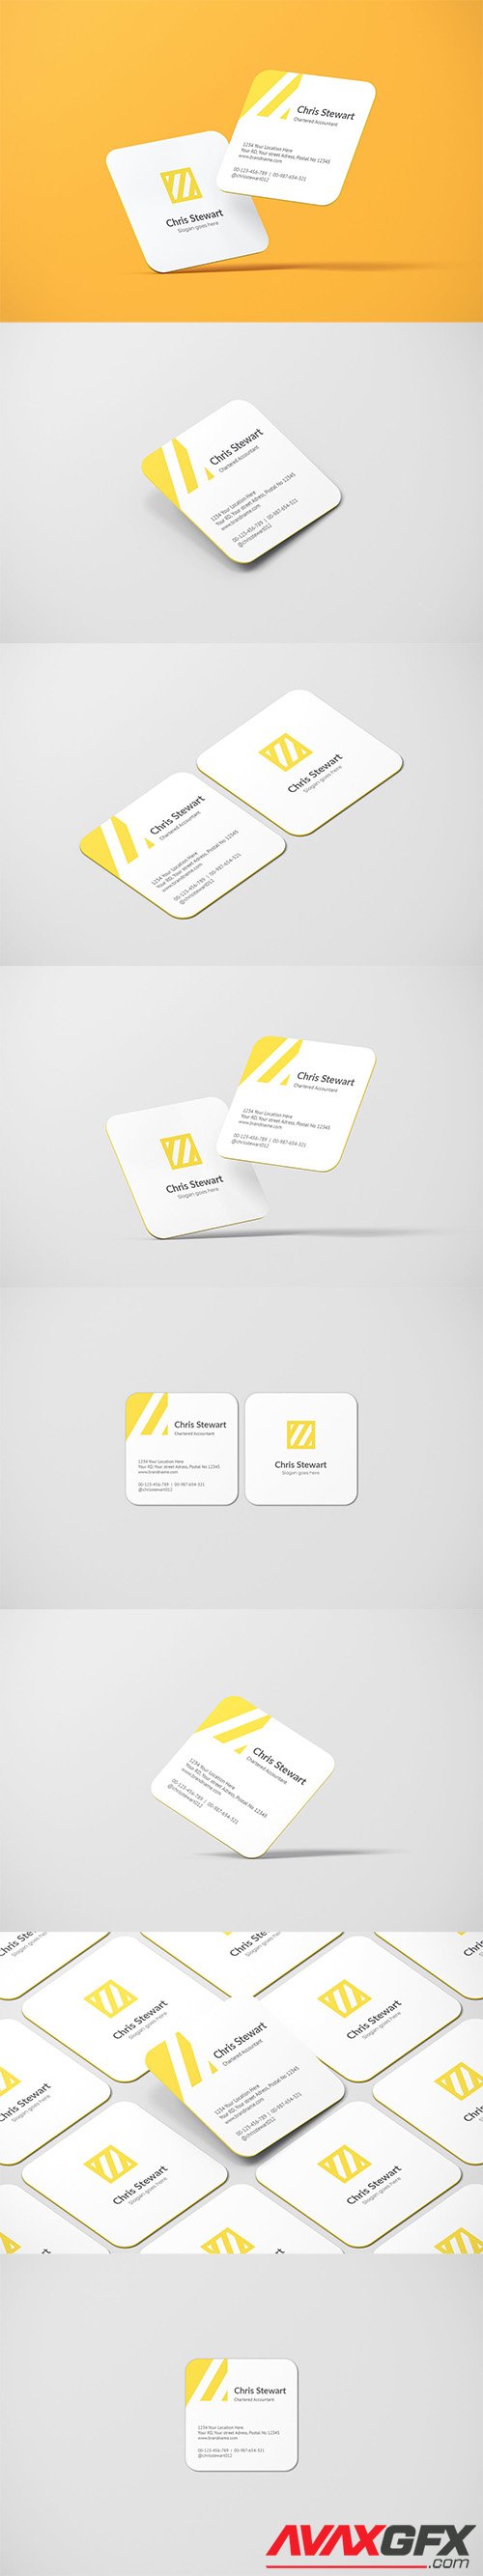 Rounded Square Business Card Mockup